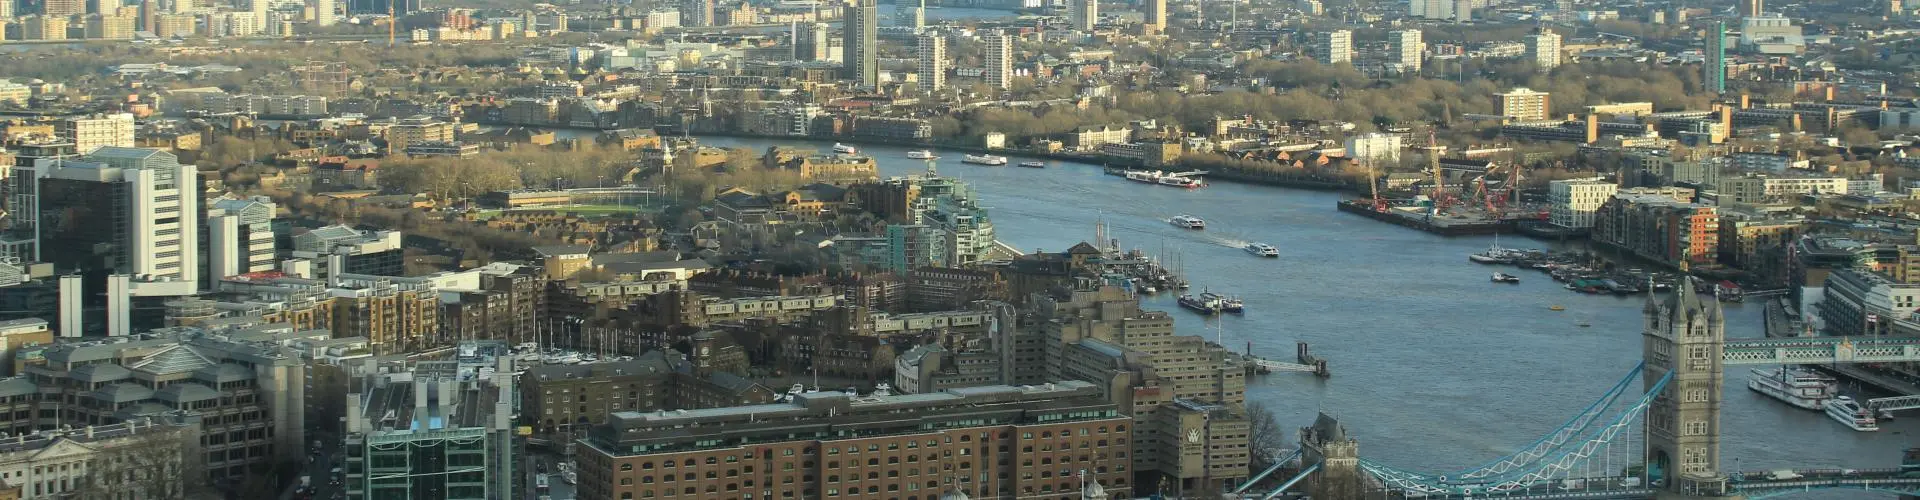 An aerial photo of the River Thames